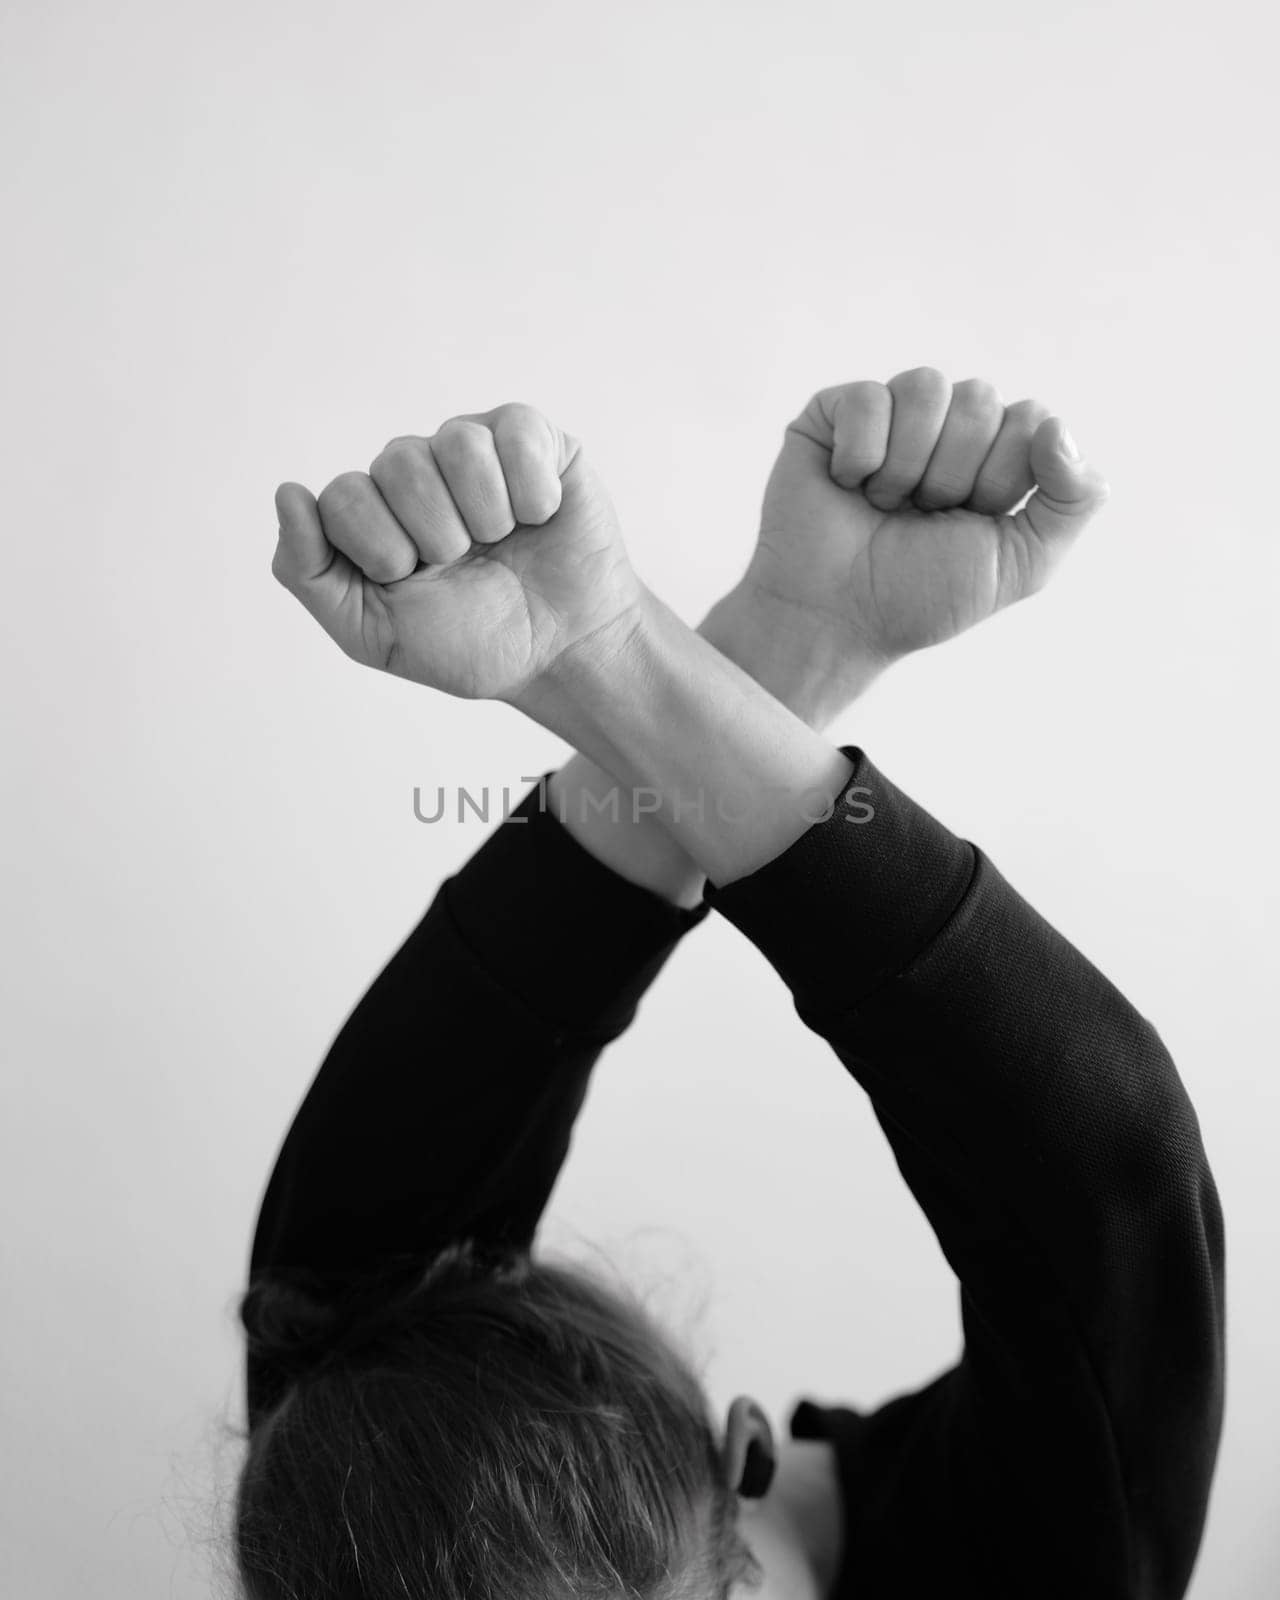 A person holding crossed hands above the head. X symbol using the hands in black and white.